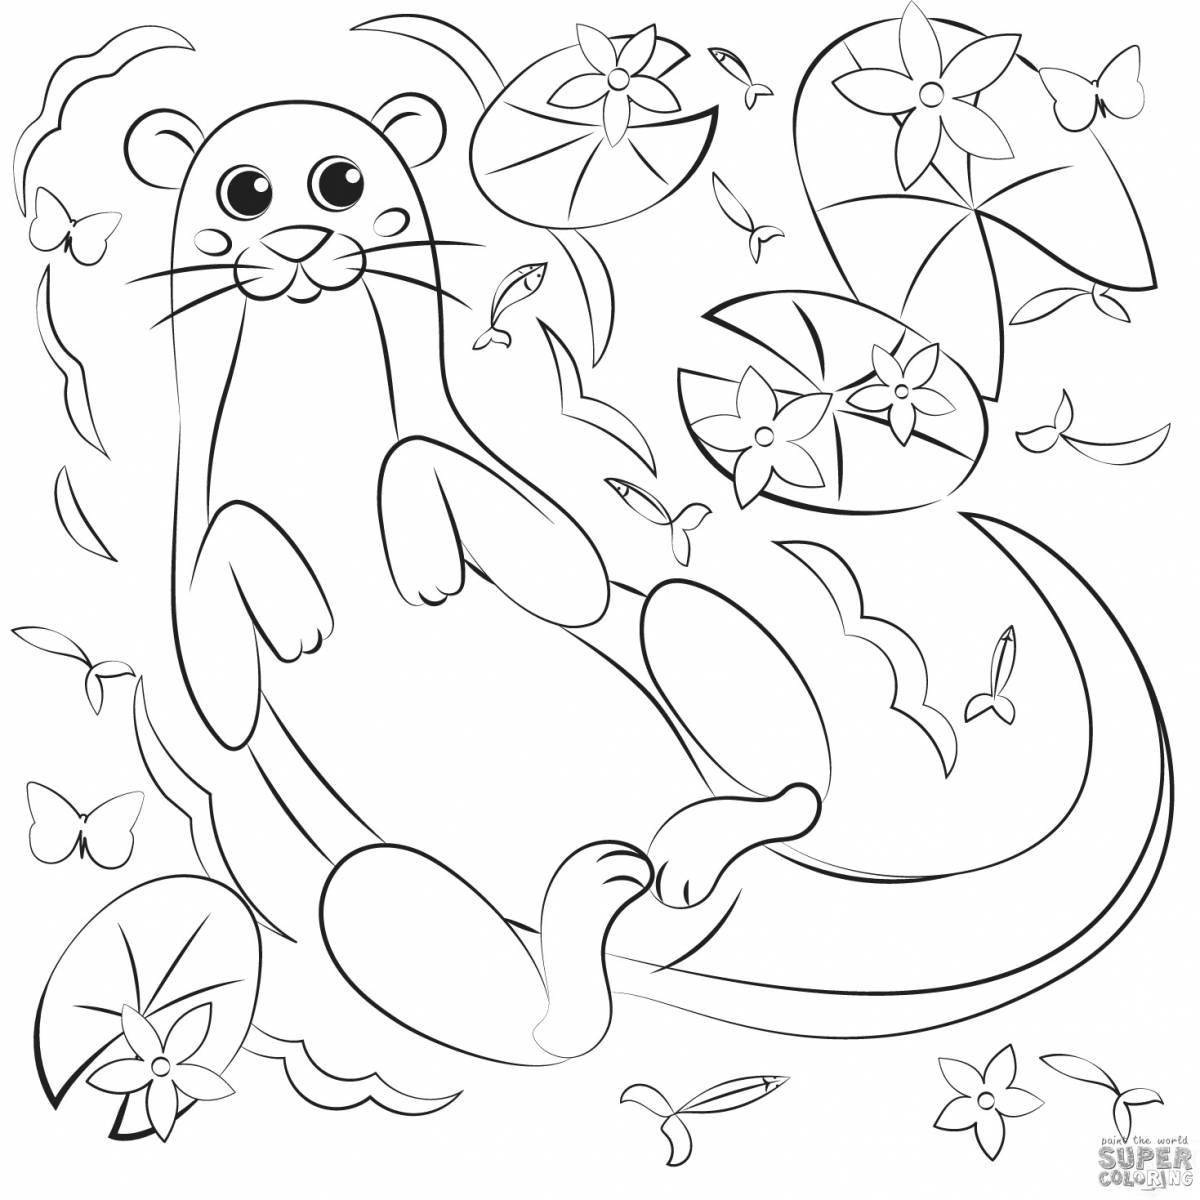 Humorous otter coloring for children